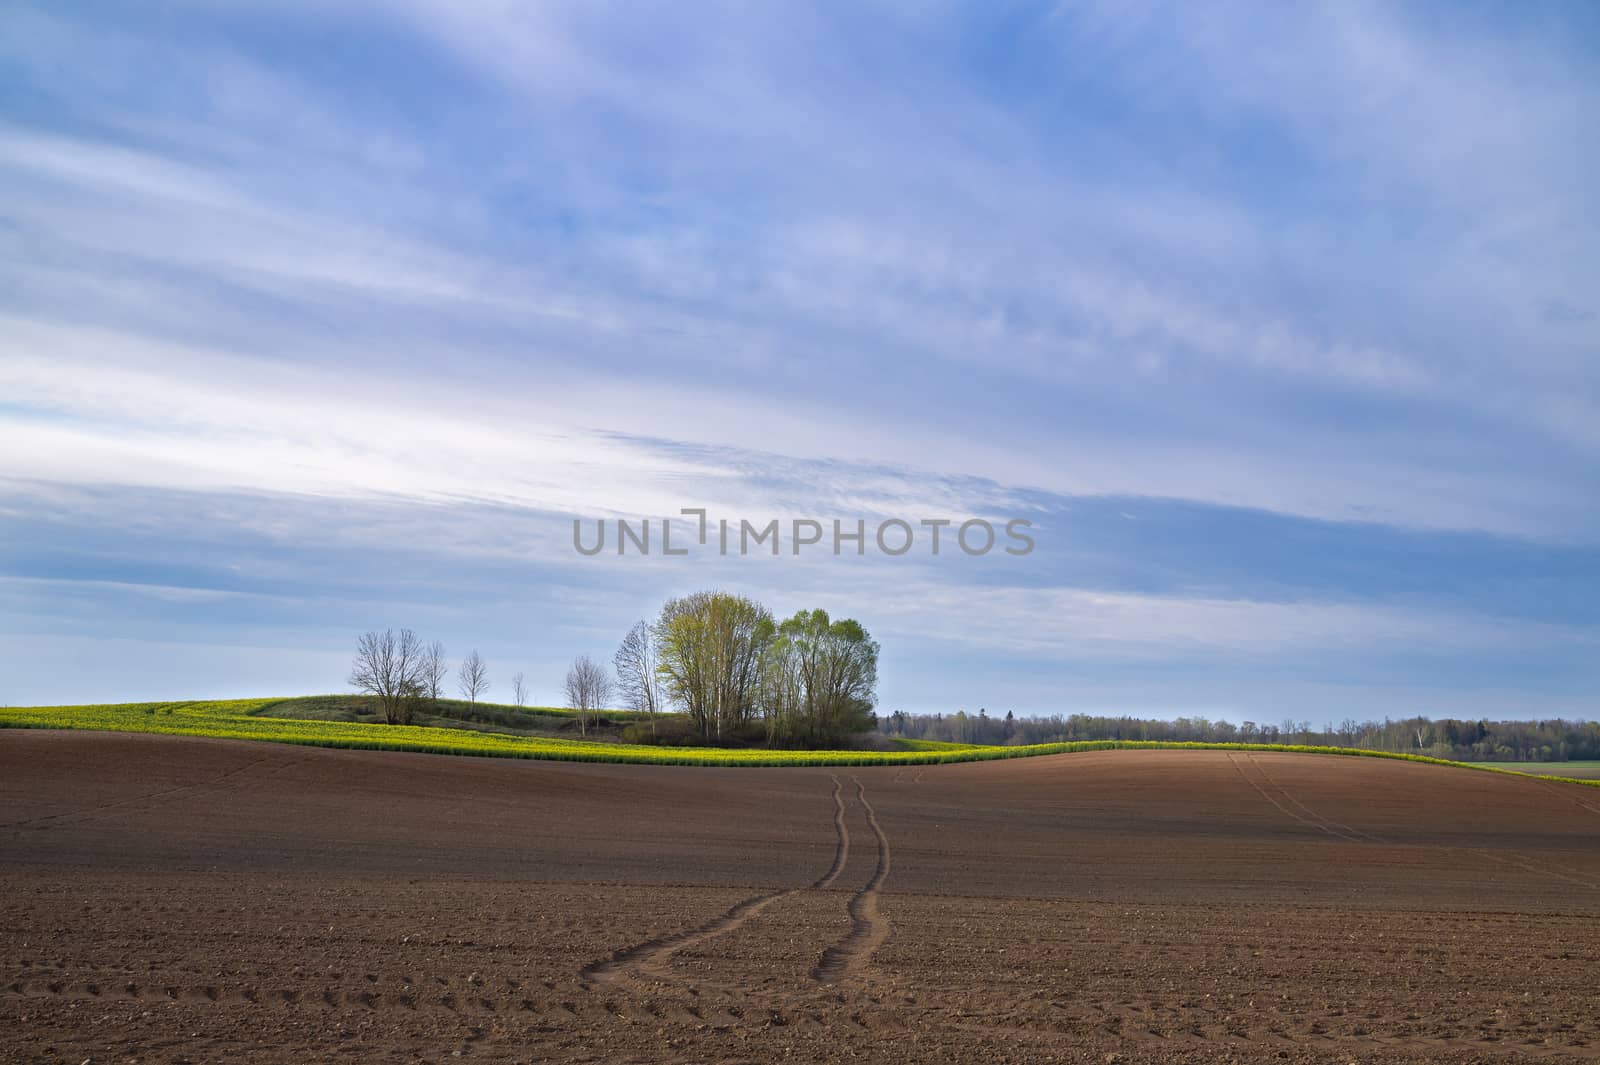 Vehicle tracks through a freshly ploughed agricultural field with rich brown fertile earth ready for planting the spring crop